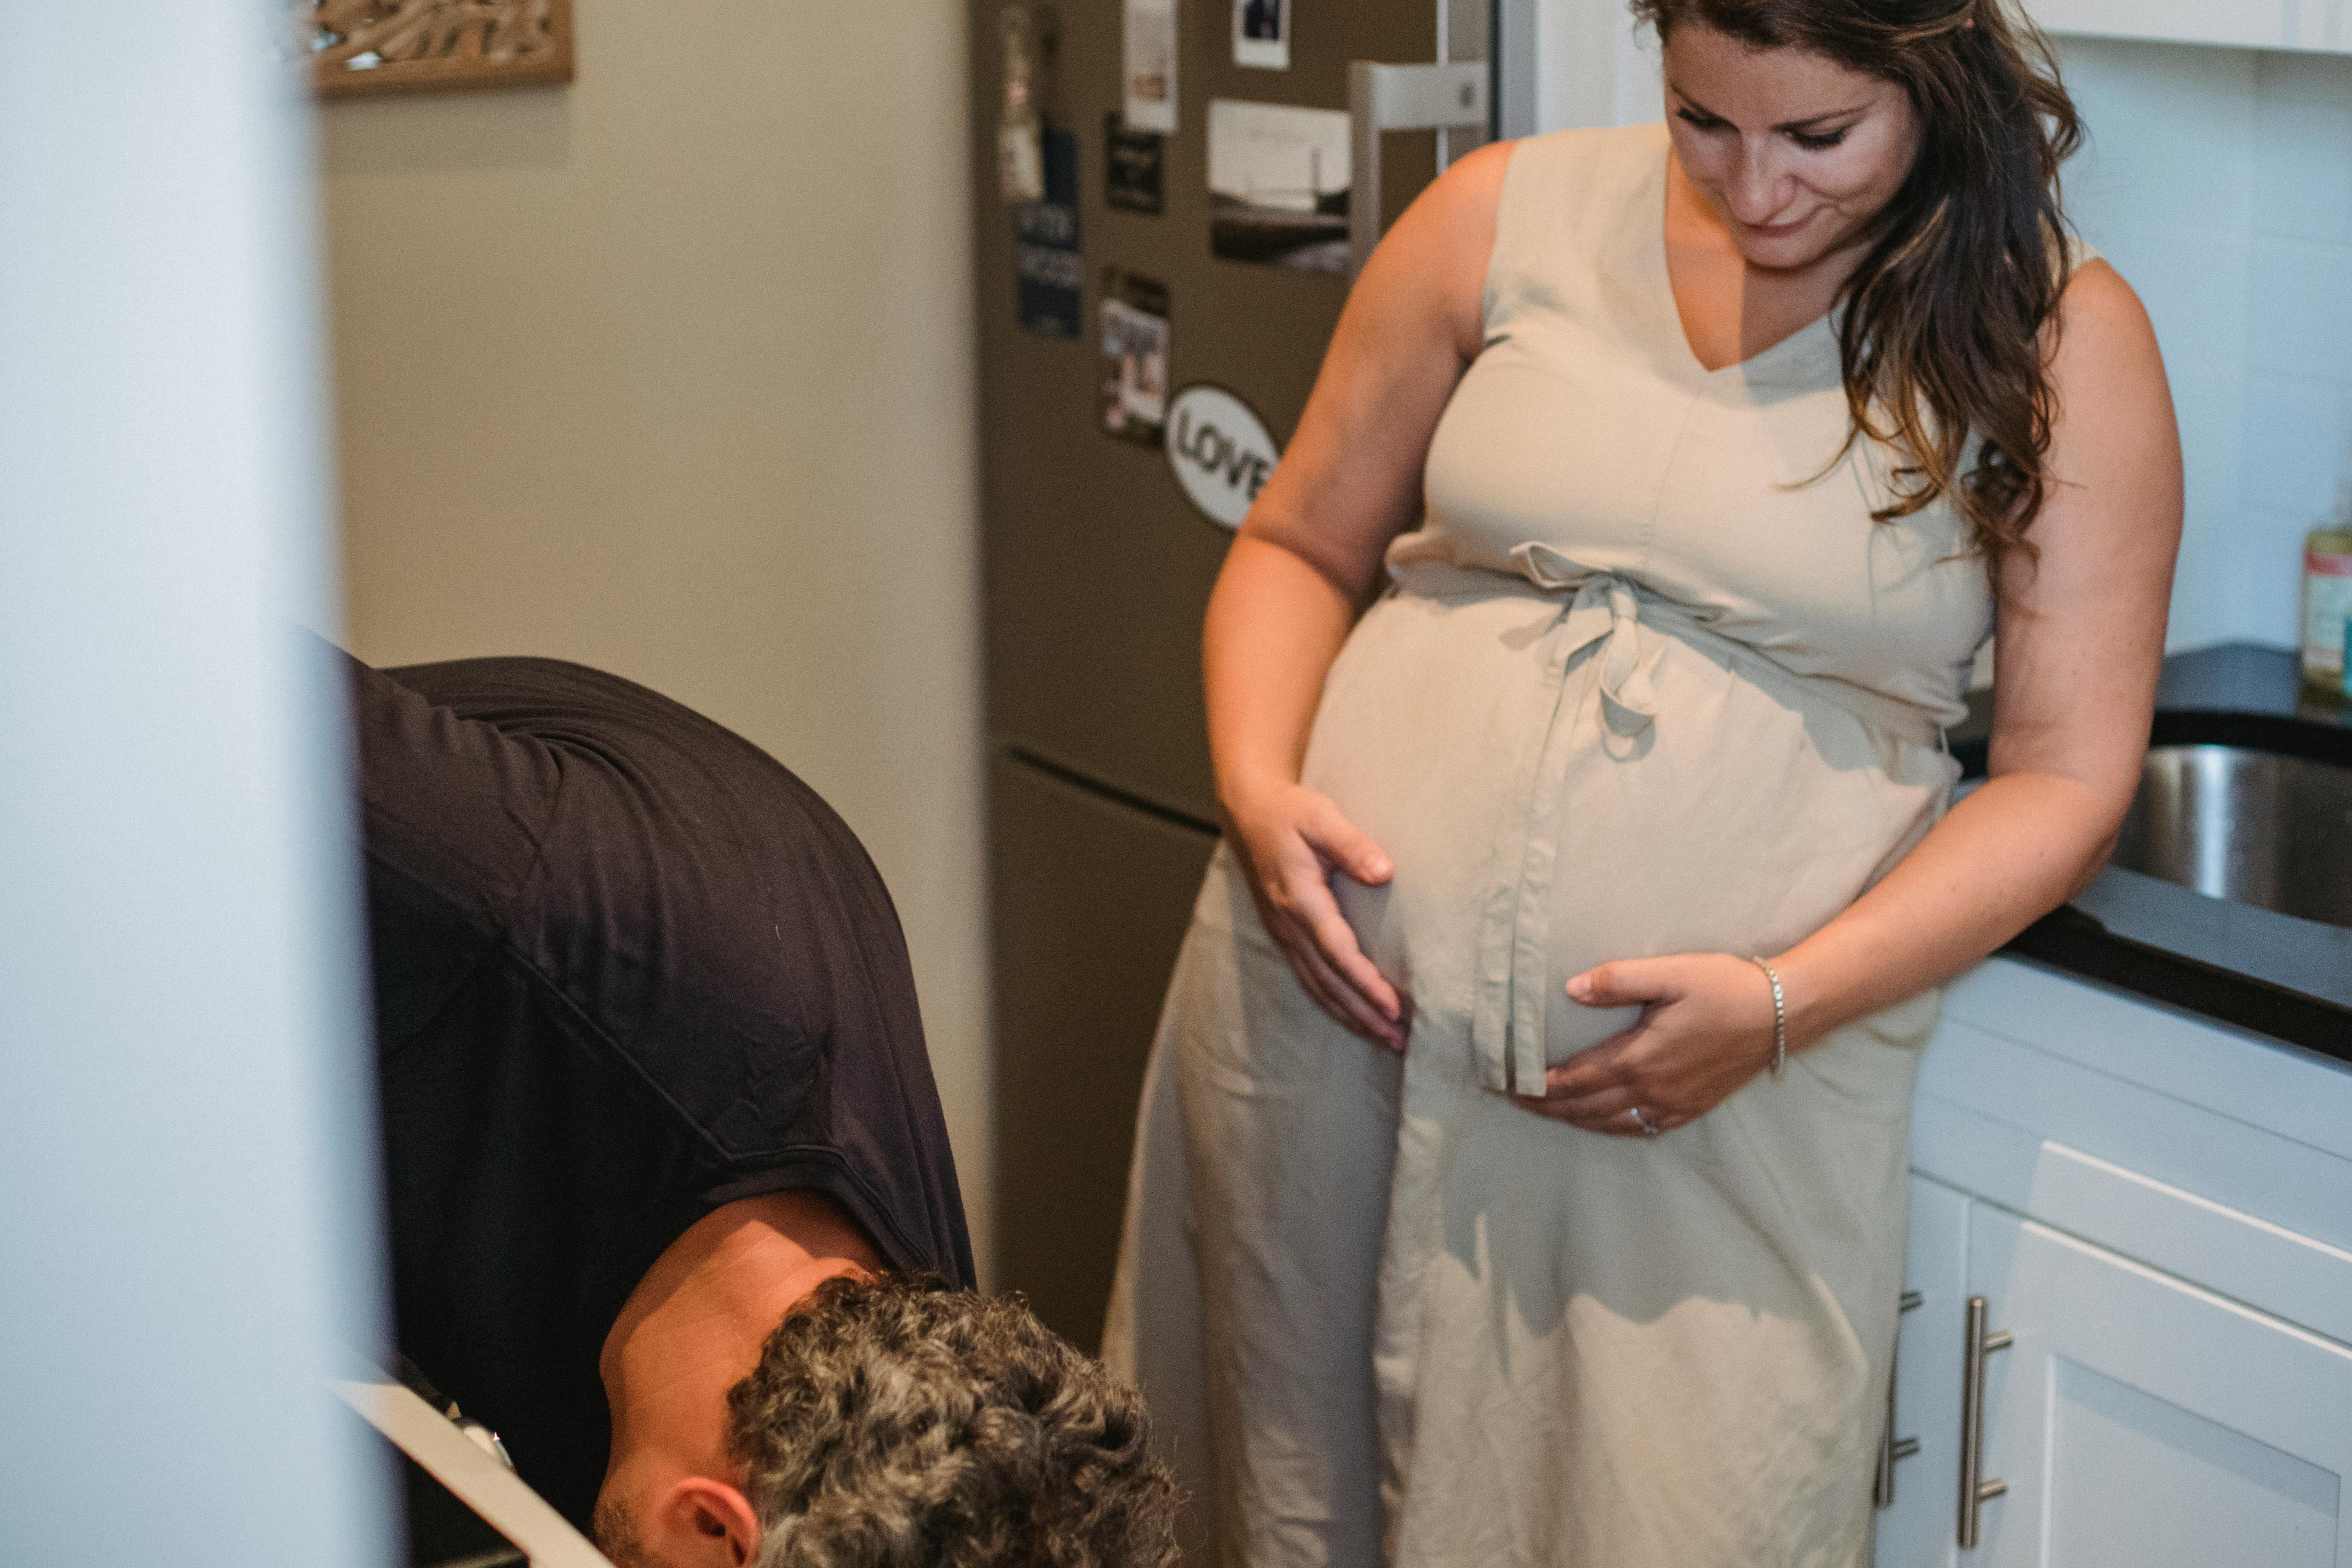 A pregnant woman touching her belly while looking at husband | Source: Pexels